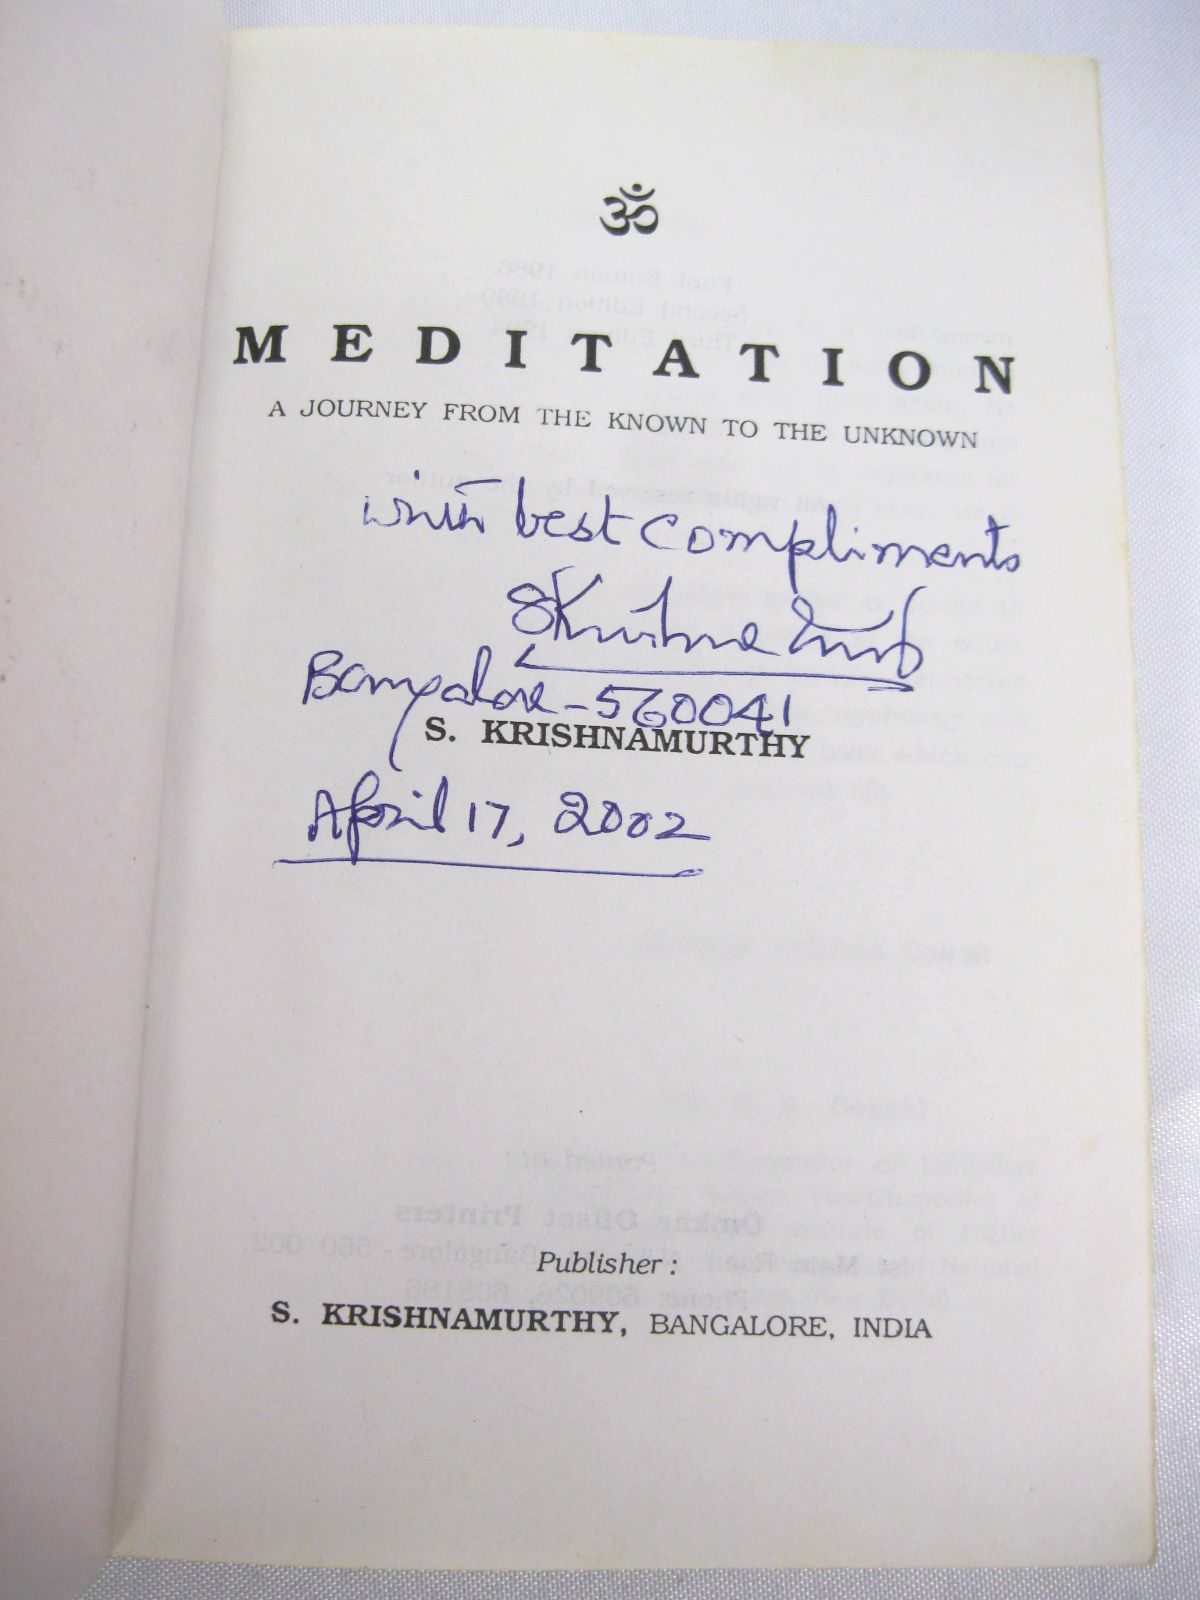 Meditation: A Journey from the Known to the Unknown by S. Krishnamurthy